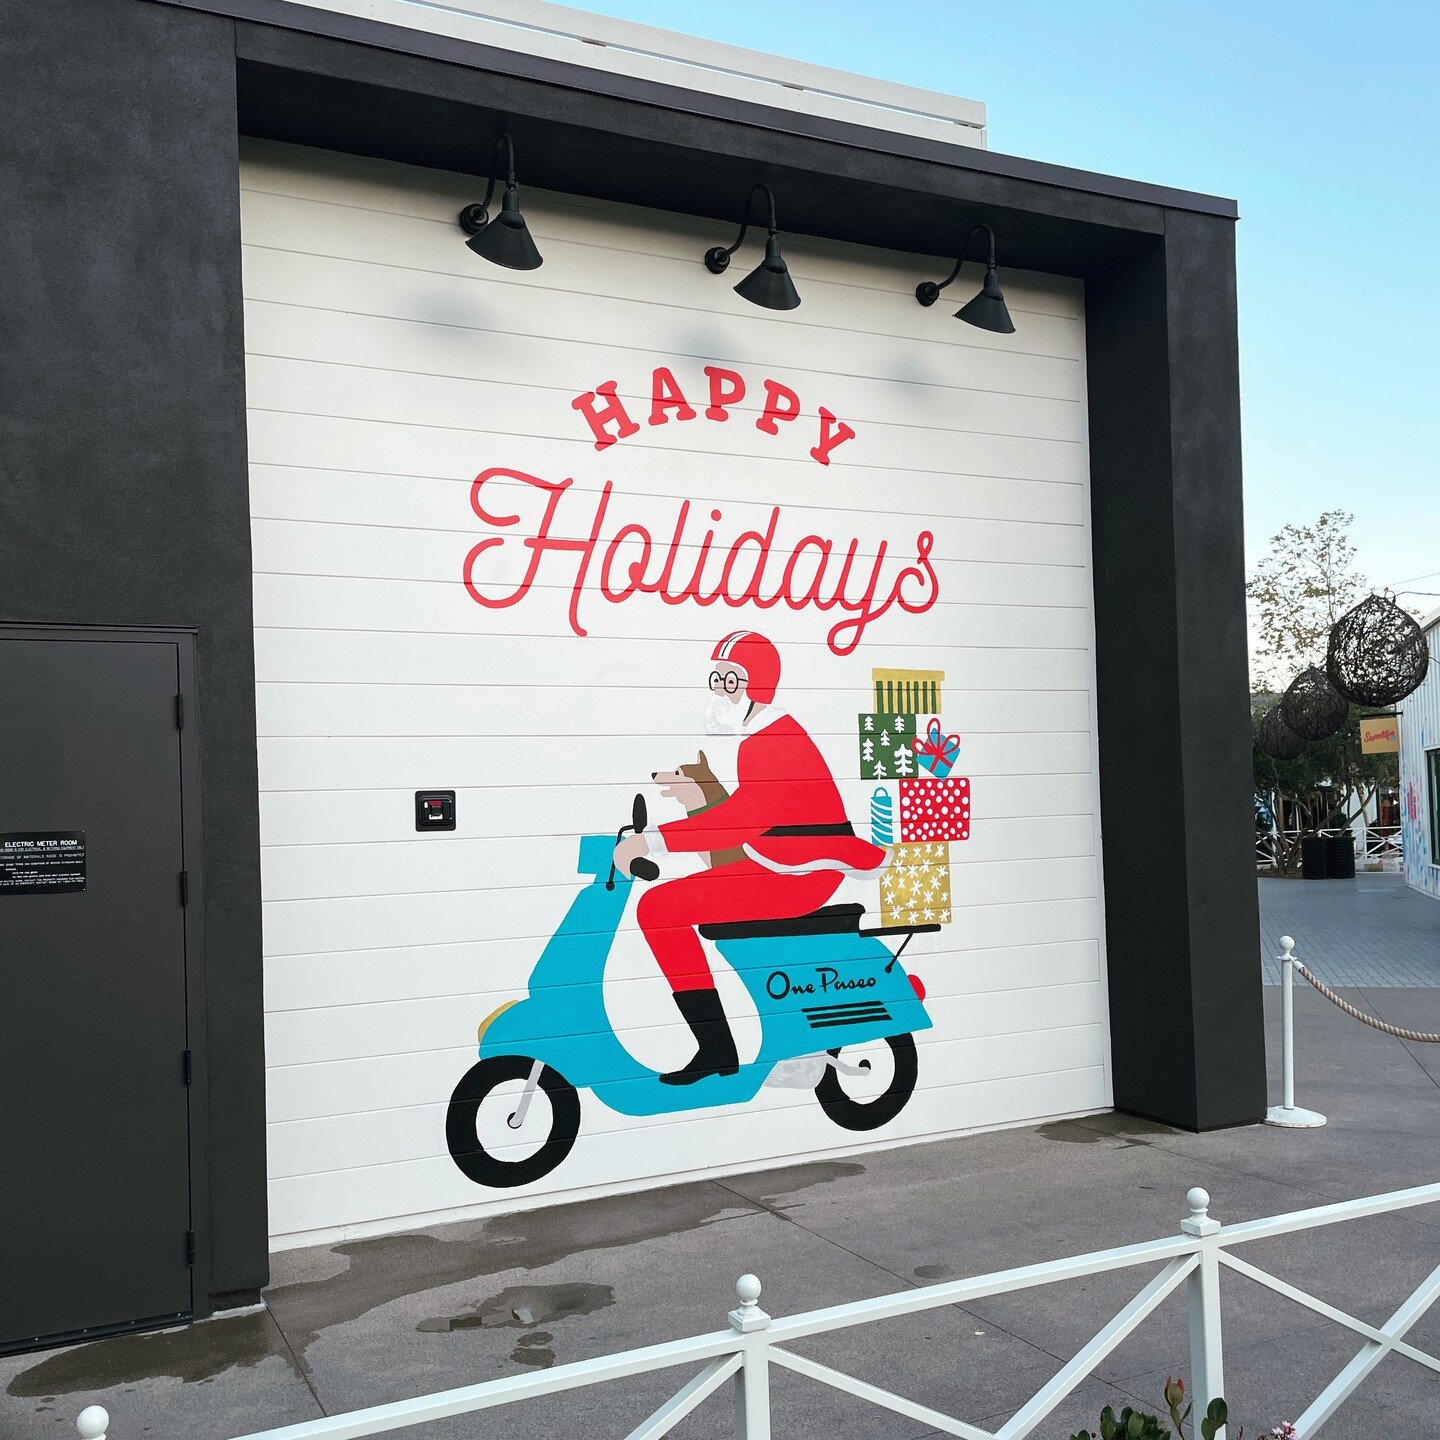 2/2 murals completed for the holiday season over @onepaseo

It is always great working with the people over @dpaart They provided the creative direction for these projects and I helped aid with design and installation #eckerdesignco